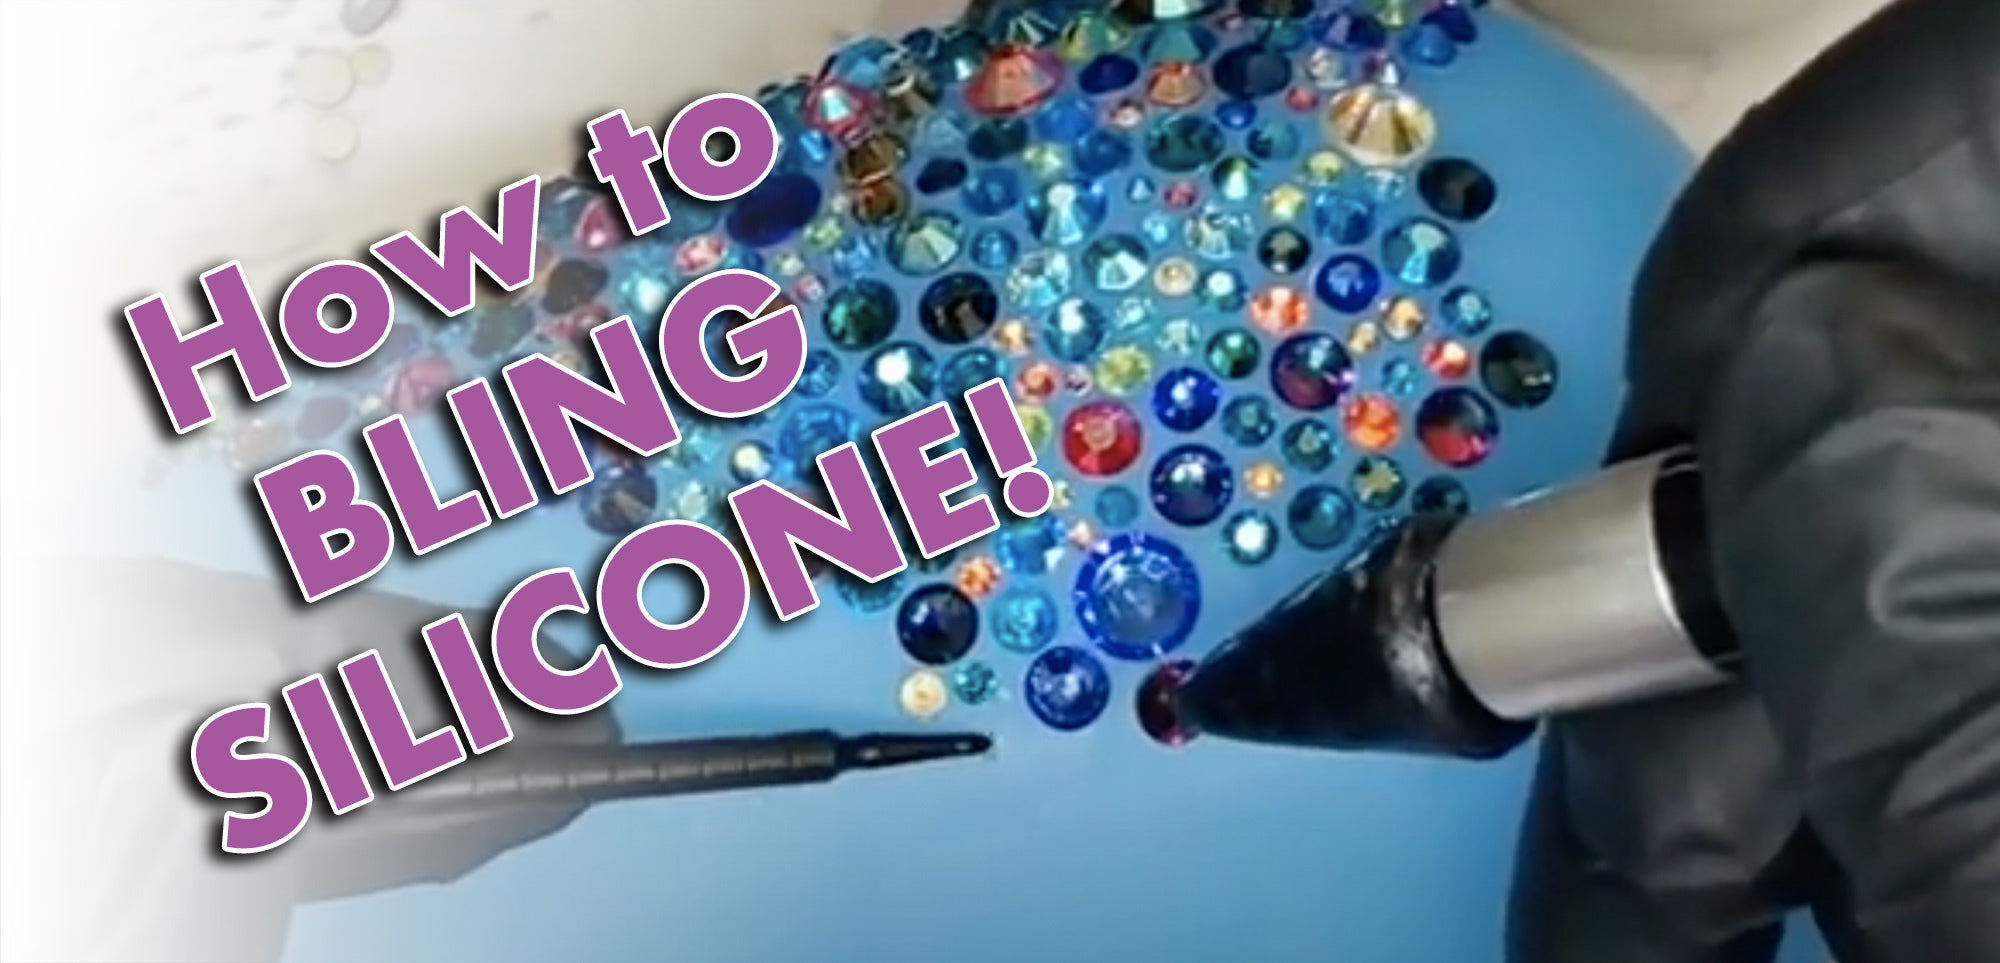 How to Bling Silicone